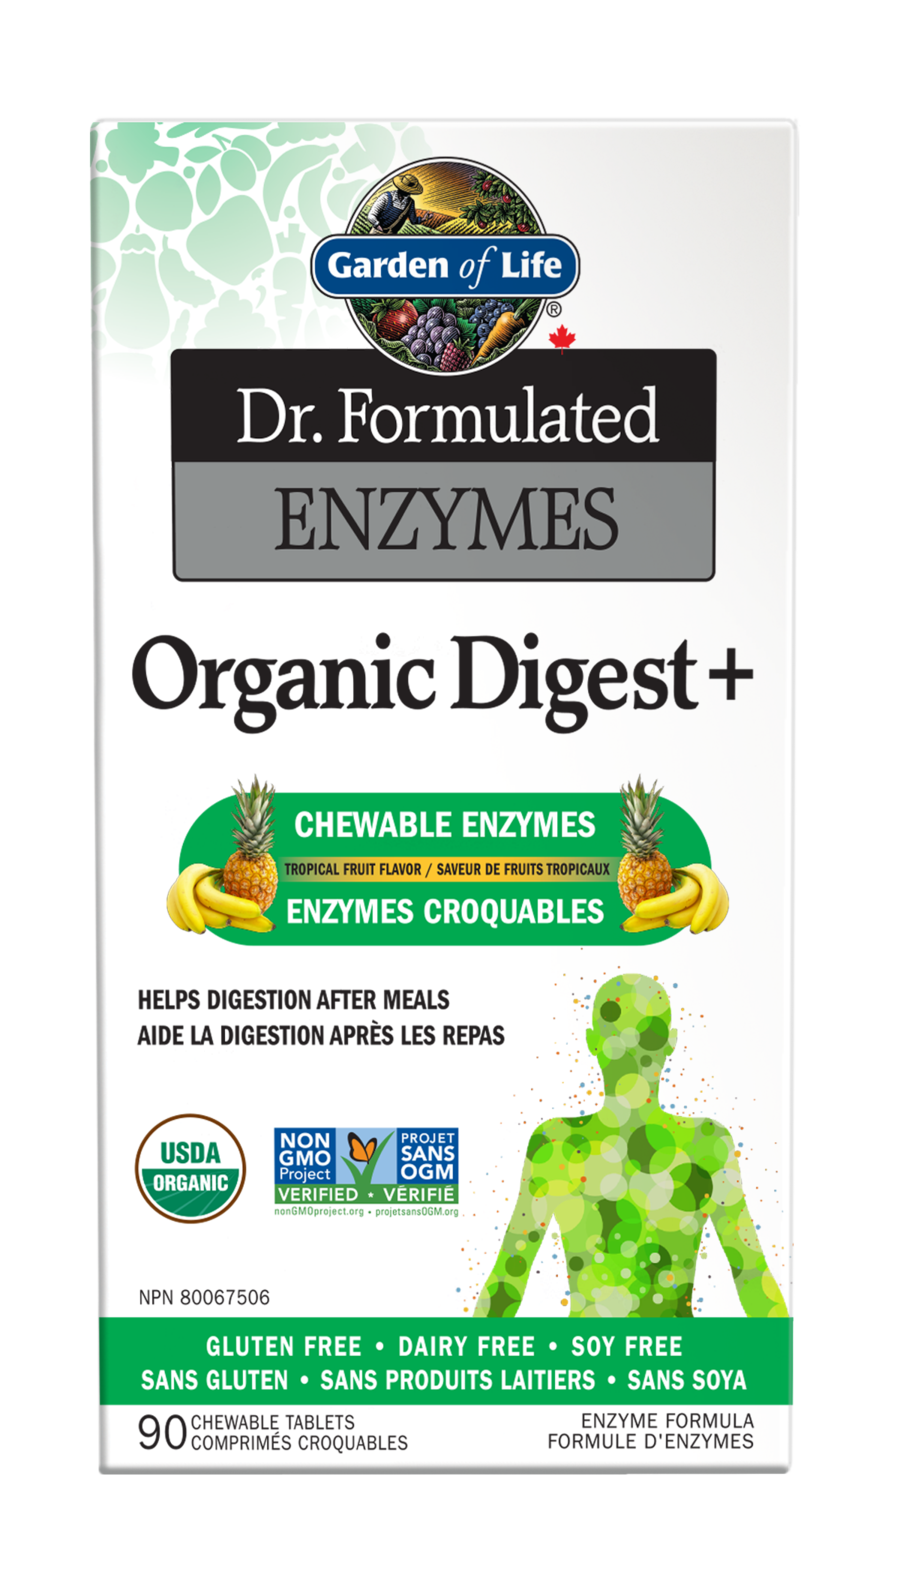 Garden of Life Dr. Formulated Enzymes Organic Digest+ Chewables